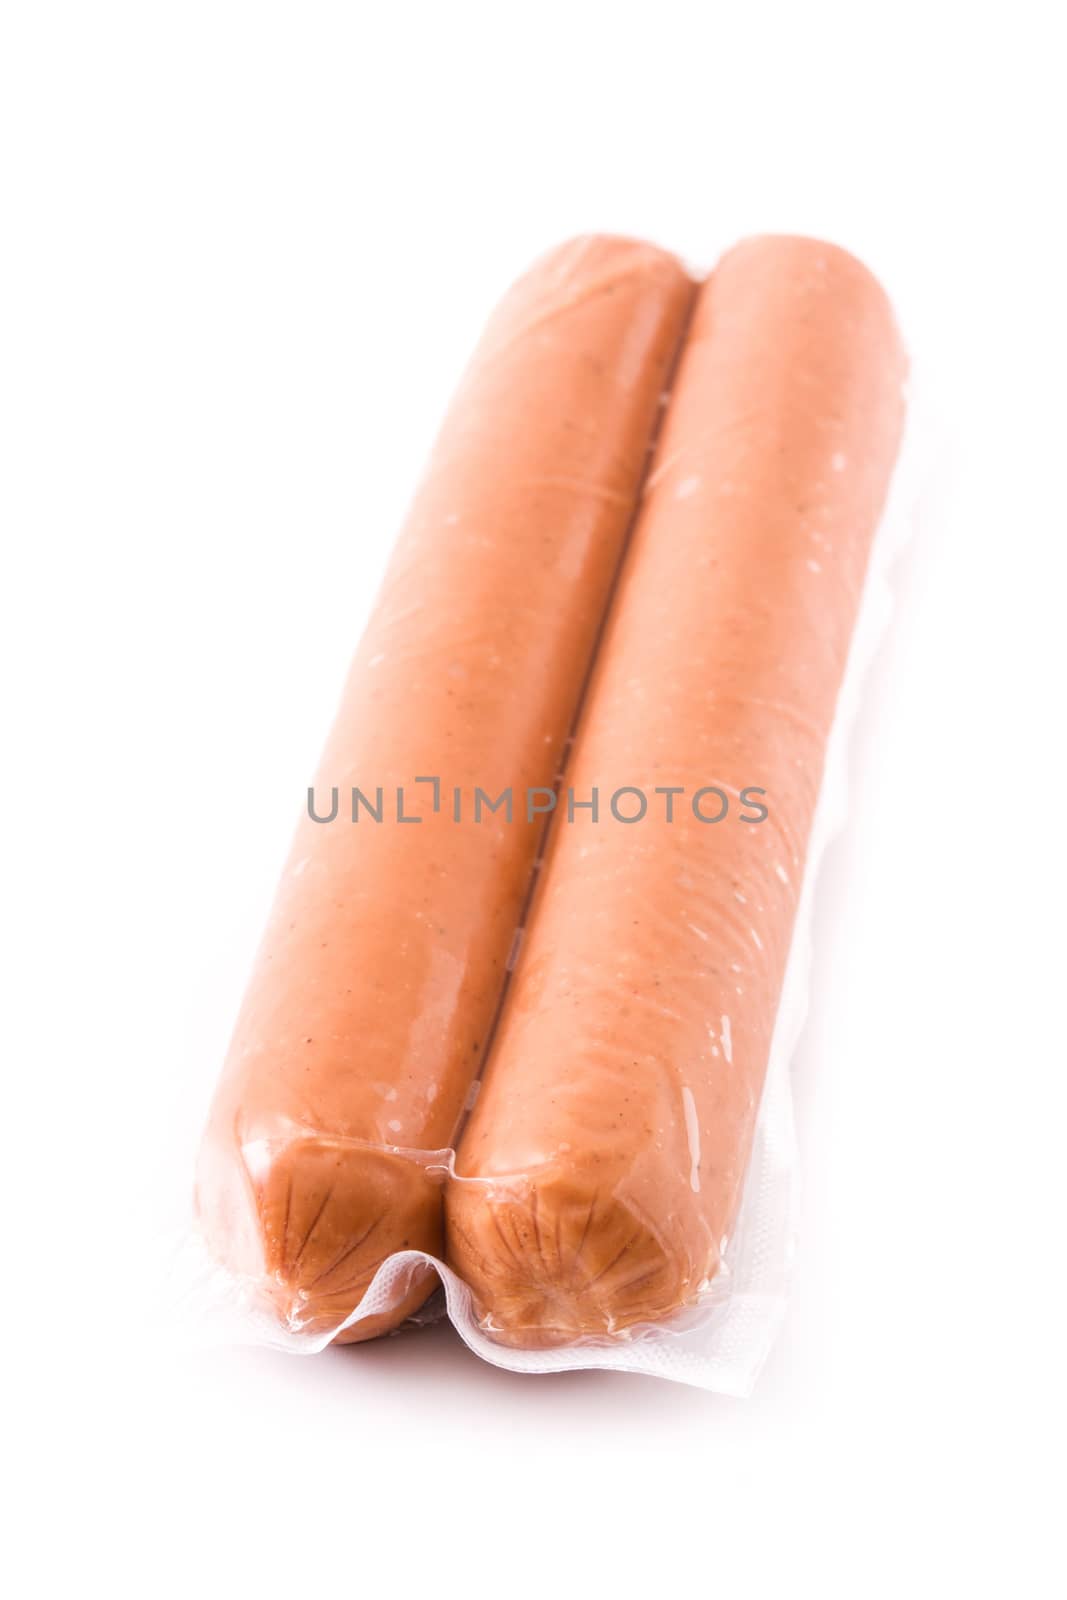 Raw sausages wrapped isolated on white background by chandlervid85